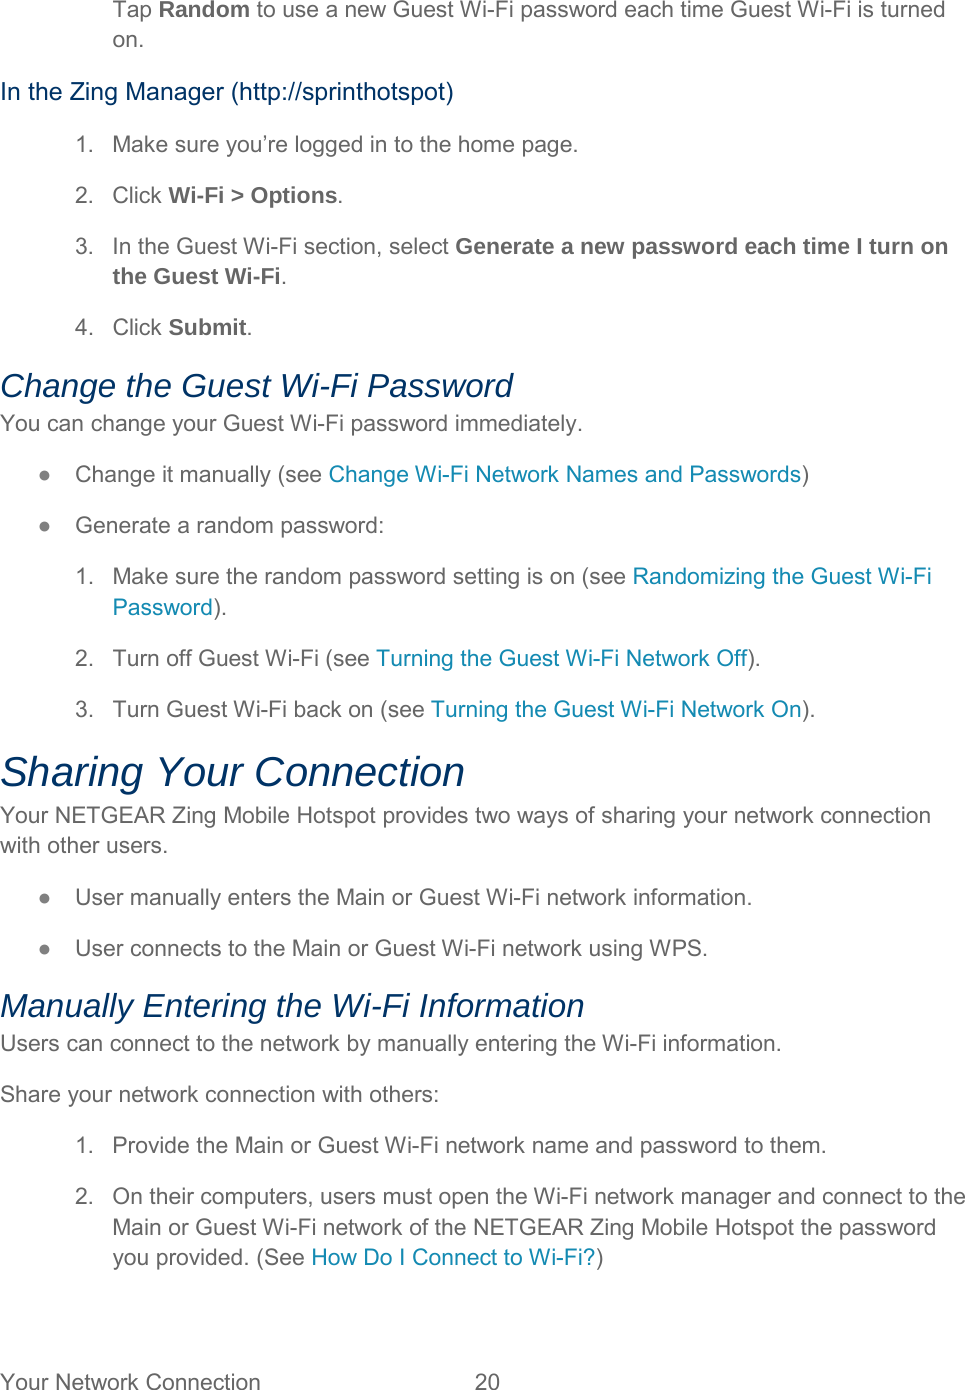 Tap Random to use a new Guest Wi-Fi password each time Guest Wi-Fi is turned on. In the Zing Manager (http://sprinthotspot) 1. Make sure you’re logged in to the home page. 2. Click Wi-Fi &gt; Options. 3. In the Guest Wi-Fi section, select Generate a new password each time I turn on the Guest Wi-Fi. 4.  Click Submit. Change the Guest Wi-Fi Password You can change your Guest Wi-Fi password immediately. ●  Change it manually (see Change Wi-Fi Network Names and Passwords) ●  Generate a random password: 1. Make sure the random password setting is on (see Randomizing the Guest Wi-Fi Password). 2. Turn off Guest Wi-Fi (see Turning the Guest Wi-Fi Network Off). 3. Turn Guest Wi-Fi back on (see Turning the Guest Wi-Fi Network On). Sharing Your Connection Your NETGEAR Zing Mobile Hotspot provides two ways of sharing your network connection with other users. ●  User manually enters the Main or Guest Wi-Fi network information. ●  User connects to the Main or Guest Wi-Fi network using WPS. Manually Entering the Wi-Fi Information Users can connect to the network by manually entering the Wi-Fi information. Share your network connection with others: 1. Provide the Main or Guest Wi-Fi network name and password to them. 2. On their computers, users must open the Wi-Fi network manager and connect to the Main or Guest Wi-Fi network of the NETGEAR Zing Mobile Hotspot the password you provided. (See How Do I Connect to Wi-Fi?) Your Network Connection 20   